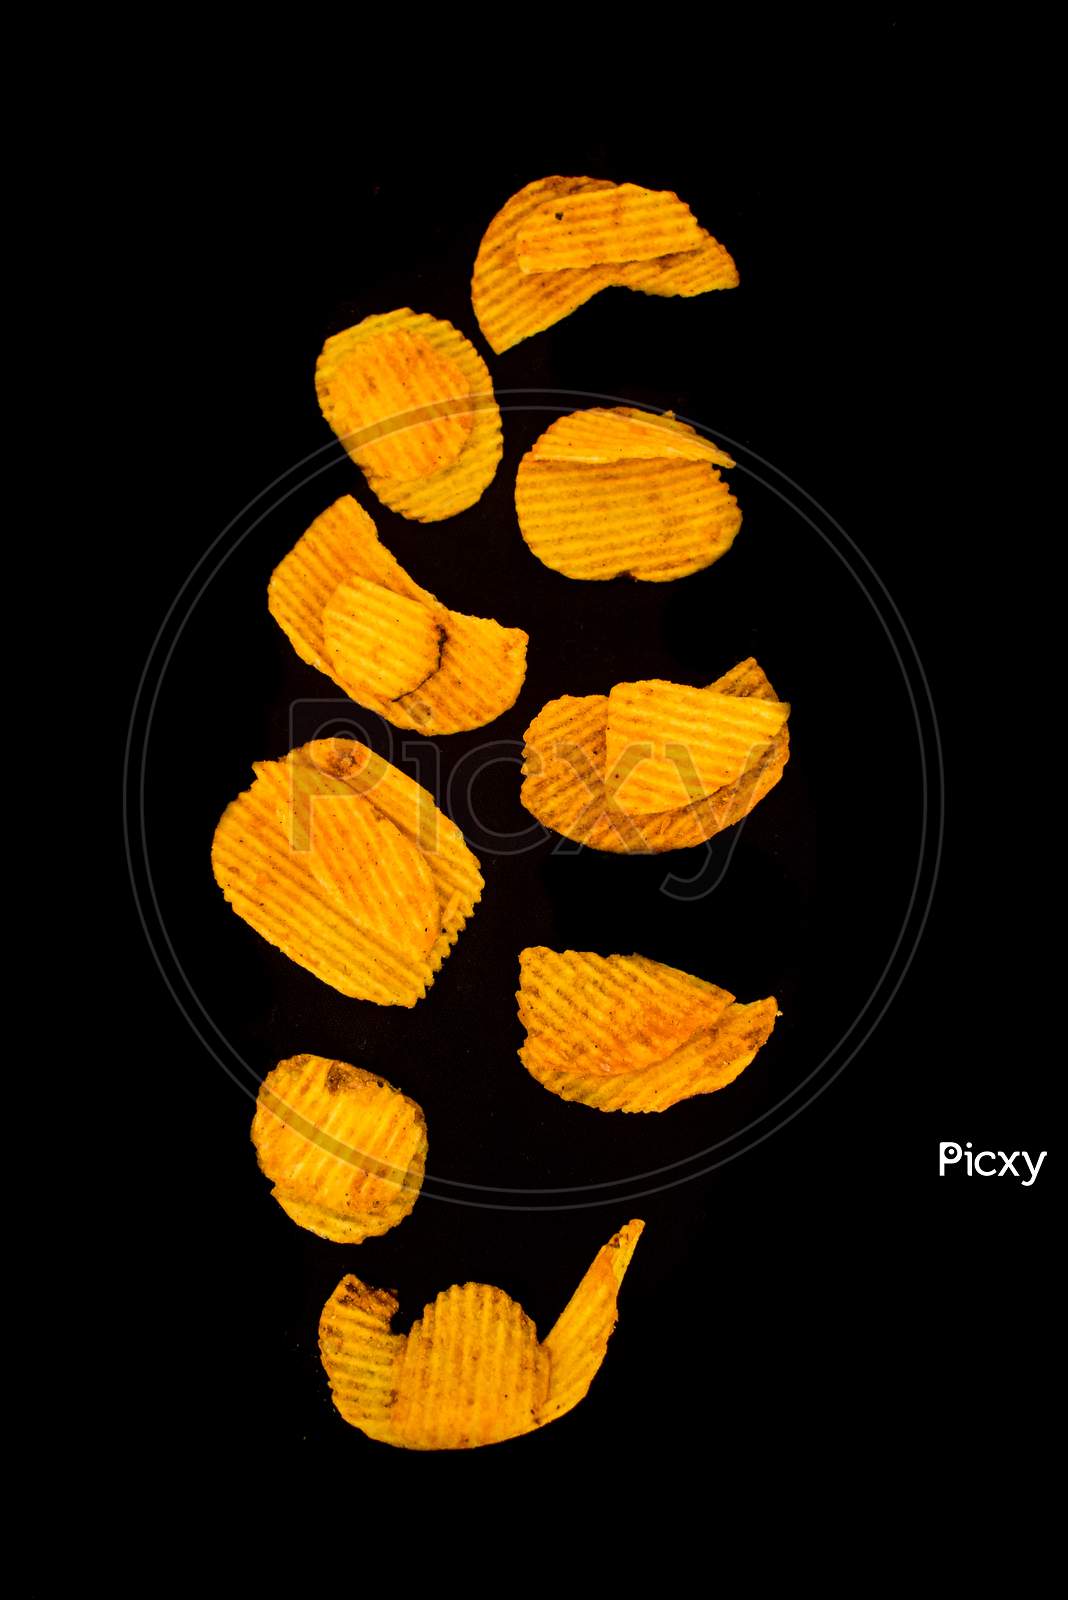 Chips With Black Background